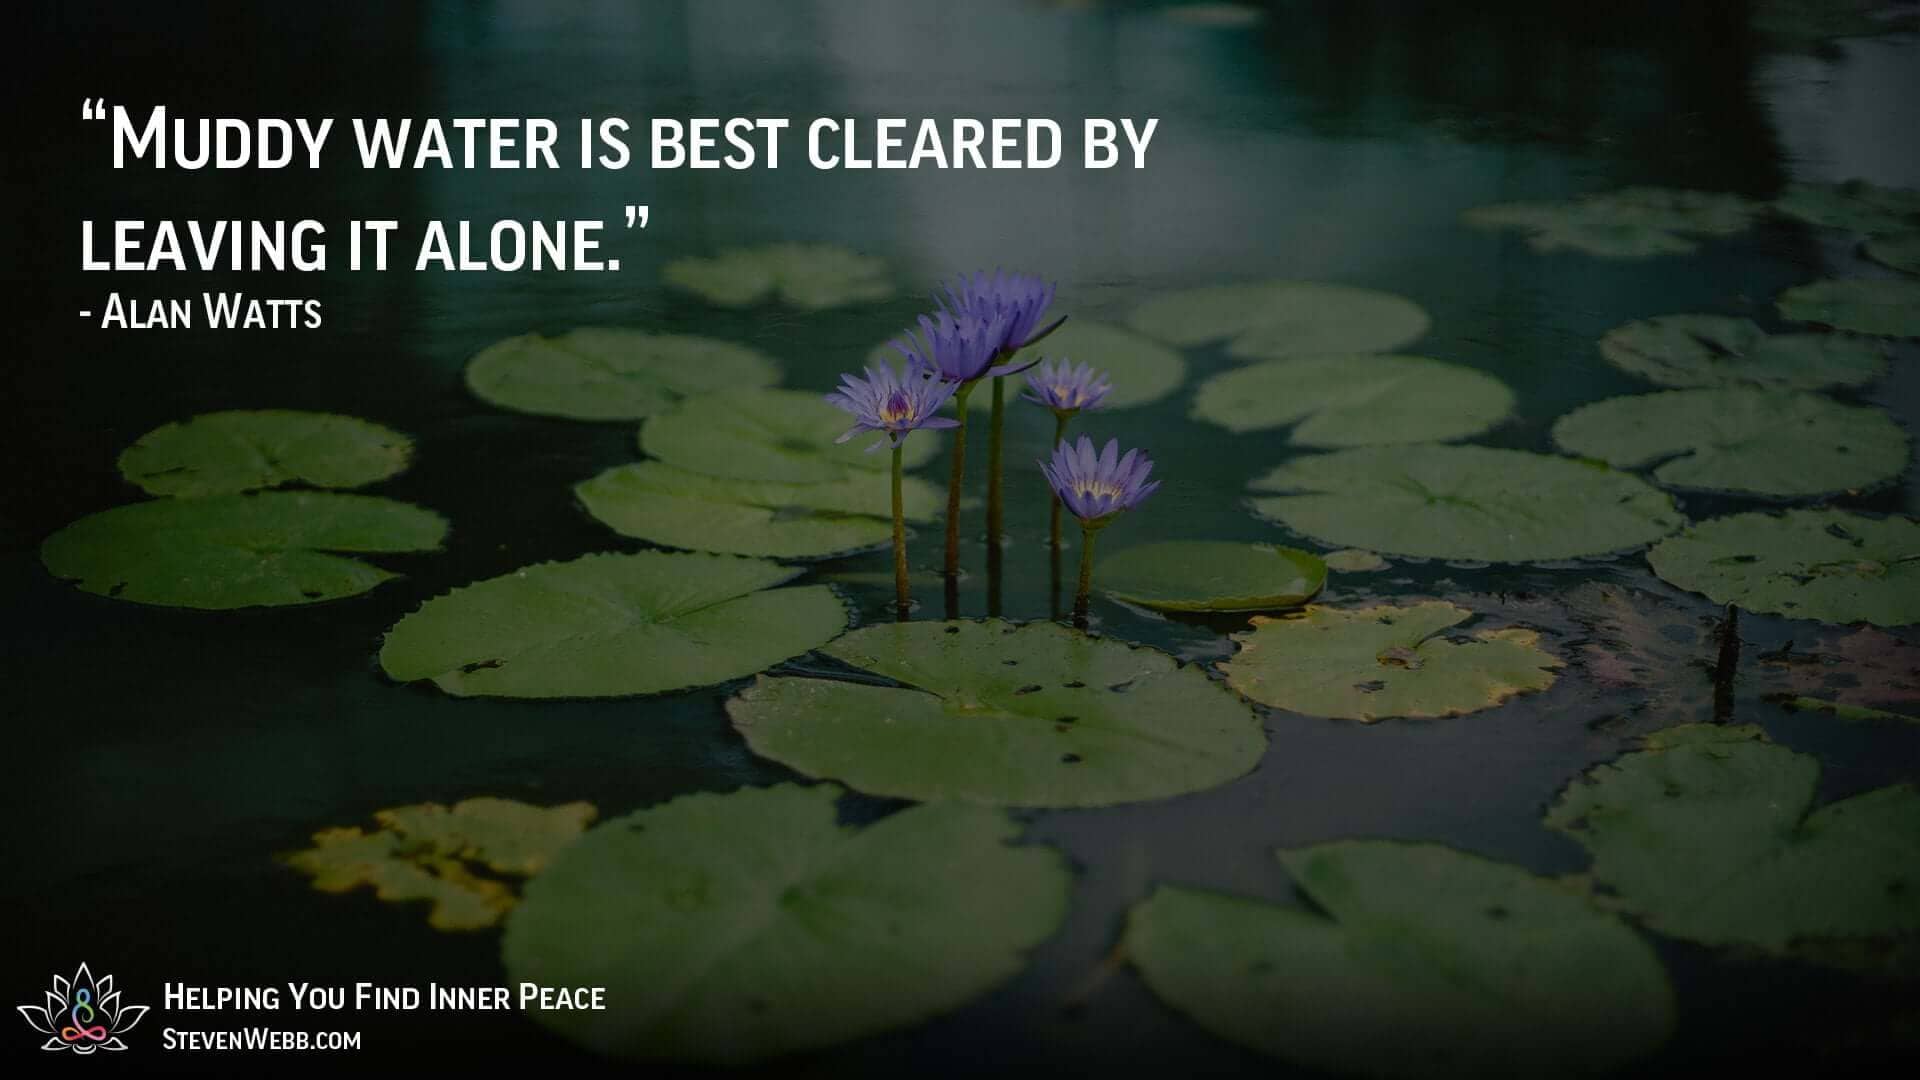 Find inner peace and happiness image quote